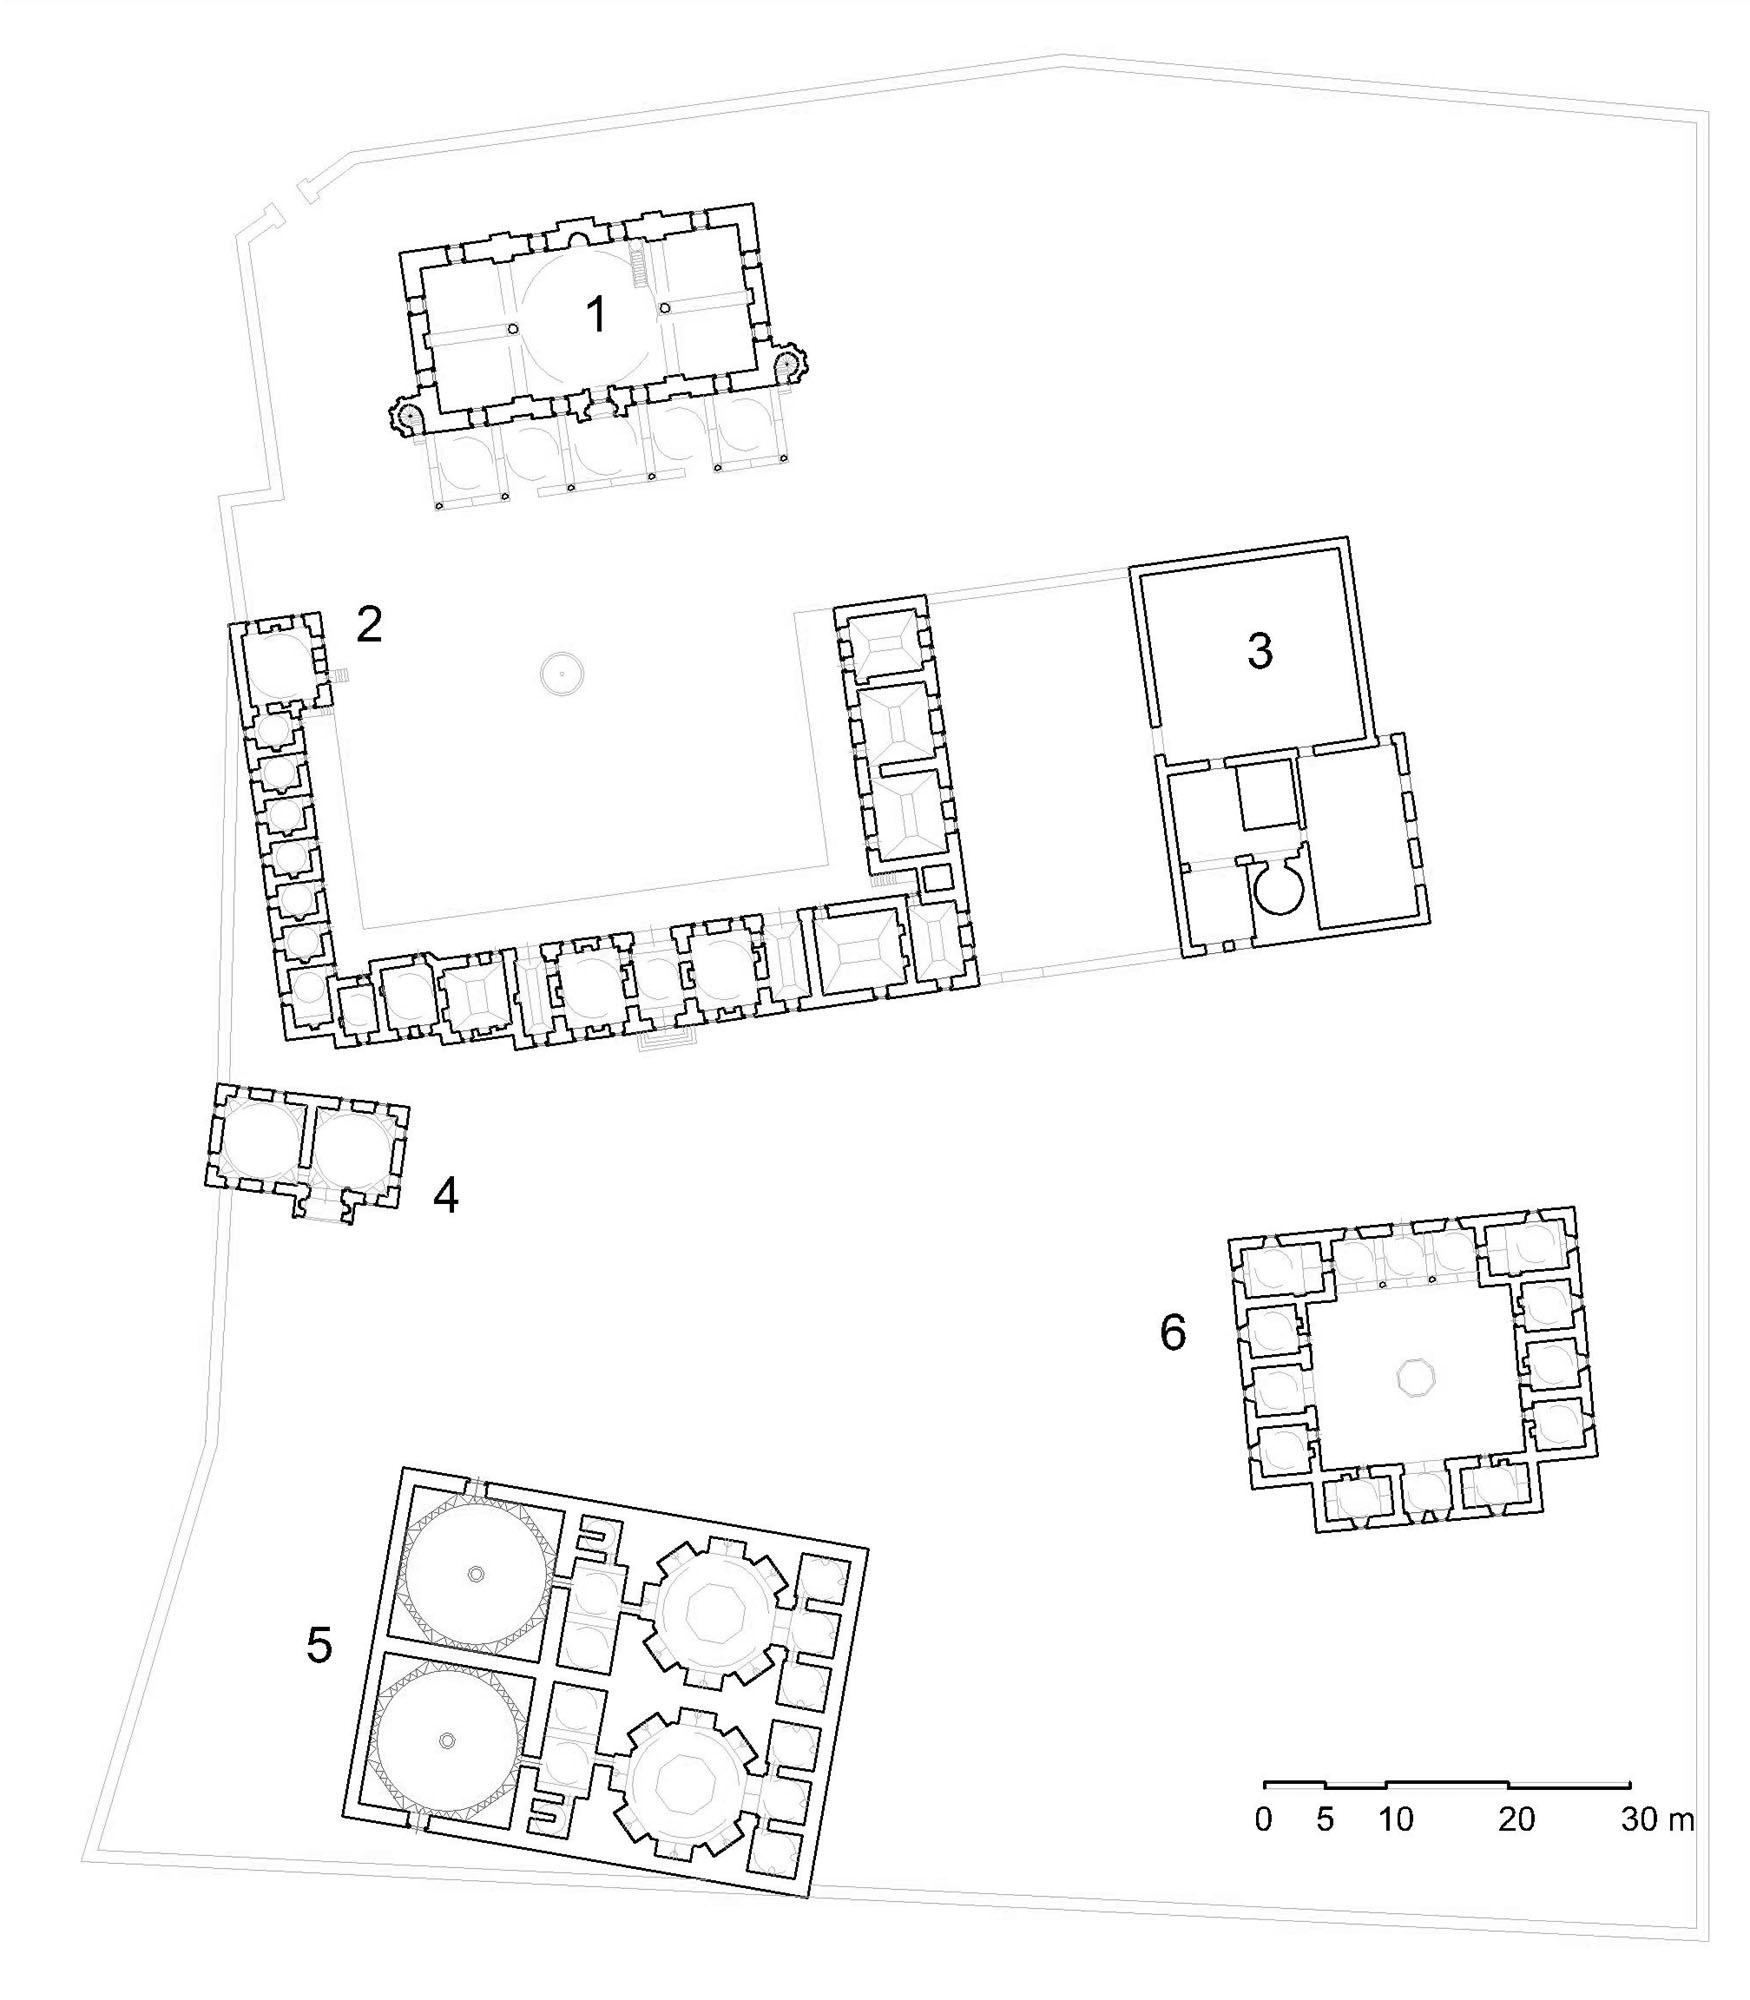 Hafsa Sultan Complex - Floor plan of complex, showing (1) mosque, (2) madrasa, (3) hospice, (4) elementary school, (5) double bath, (6) hospital. DWG file in AutoCAD 2000 format. Click the download button to download a zipped file containing the .dwg file.